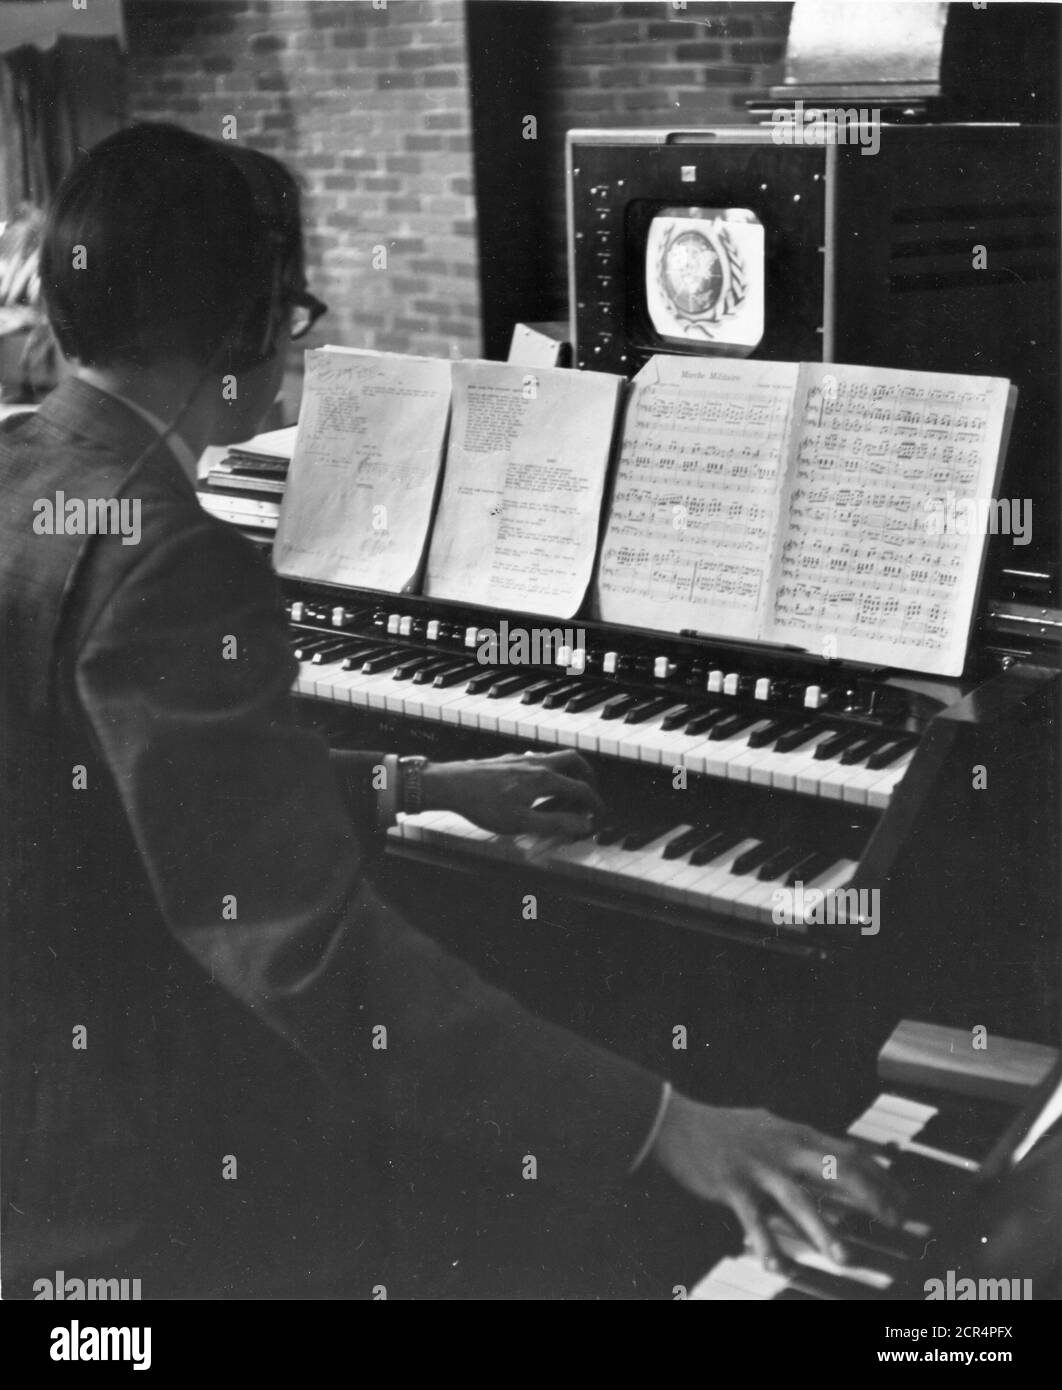 The organist providing background music for a television show watches the image on the monitor above the organ keyboard, listens to cues from the control room through earphones, has both a script and a musical score to watch and both hands full operating two keyboards, New York, NY, 7/1/1949. (Photo by RBM Vintage Images) Stock Photo